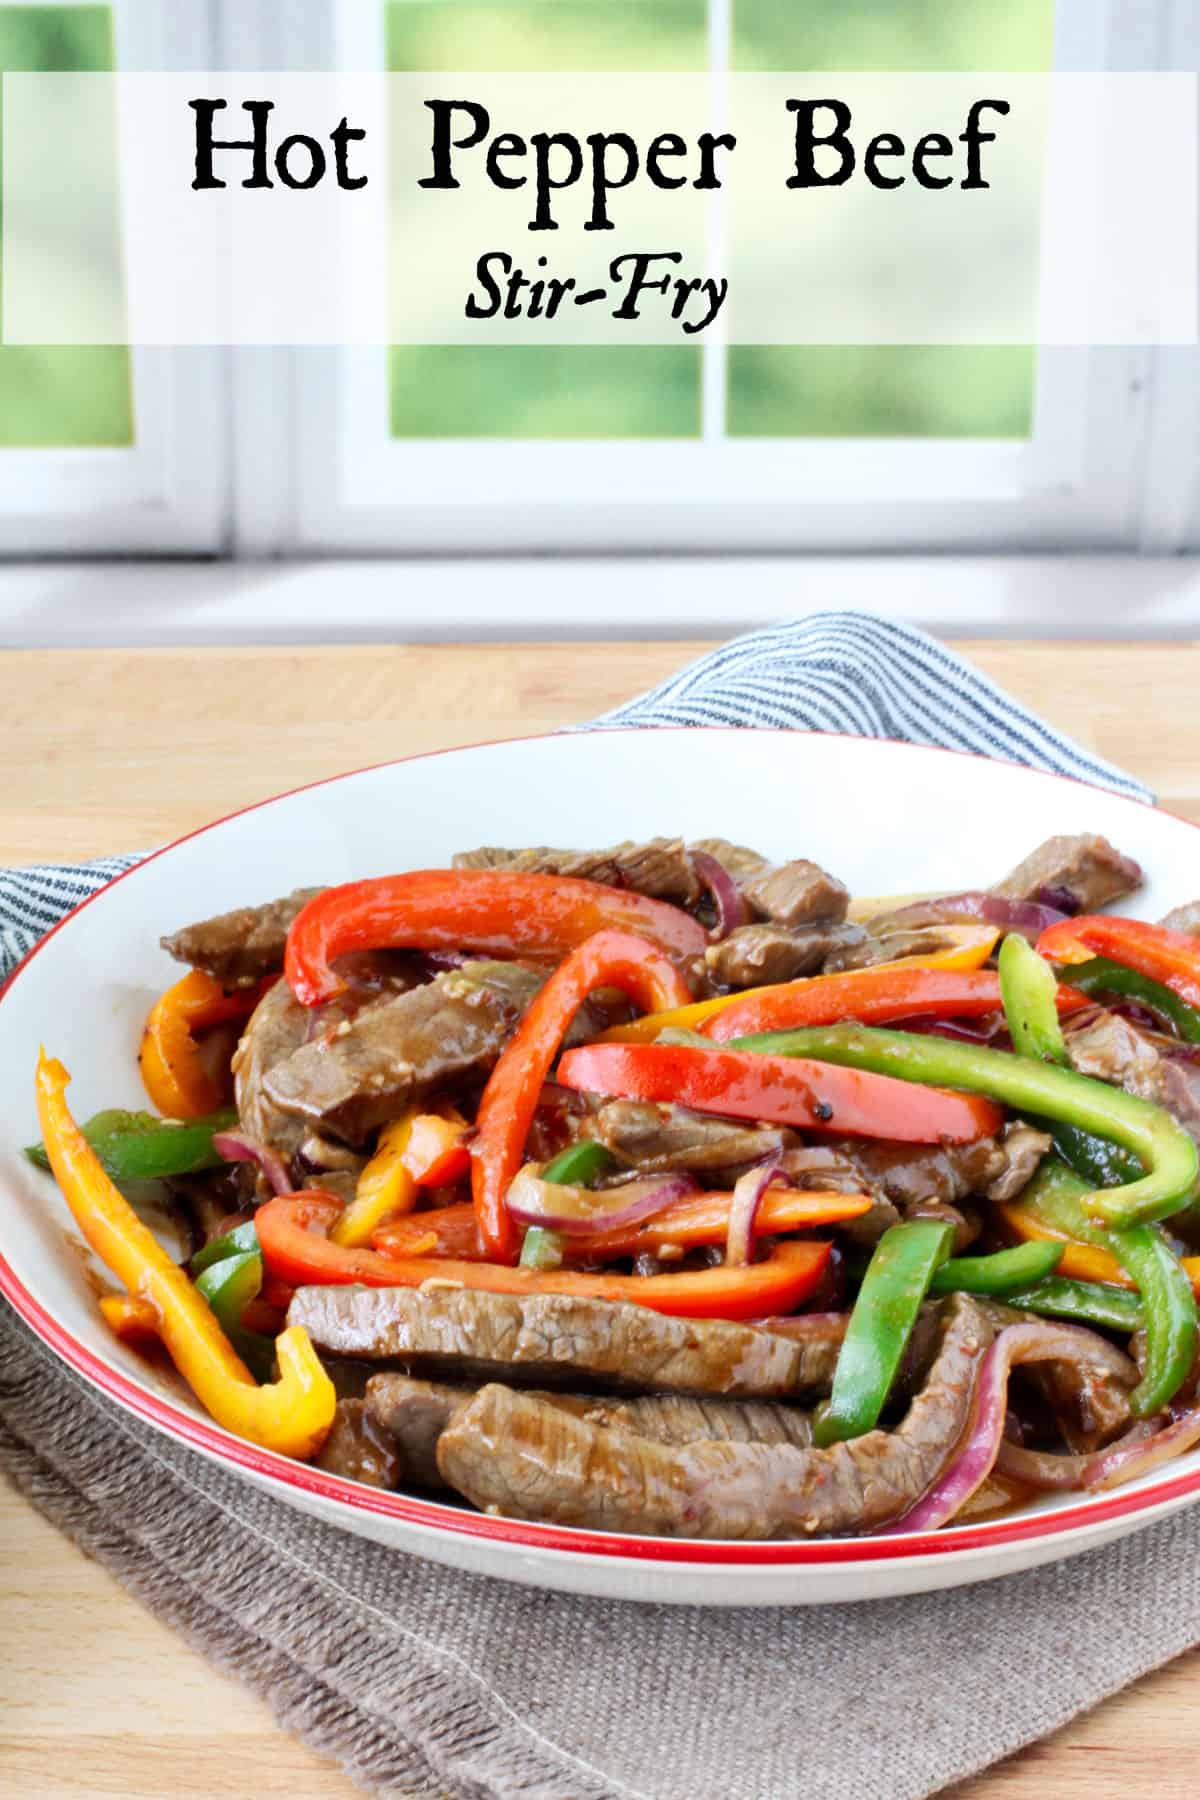 Hot Pepper Beef Stir-Fry in a red rimmed bowl.